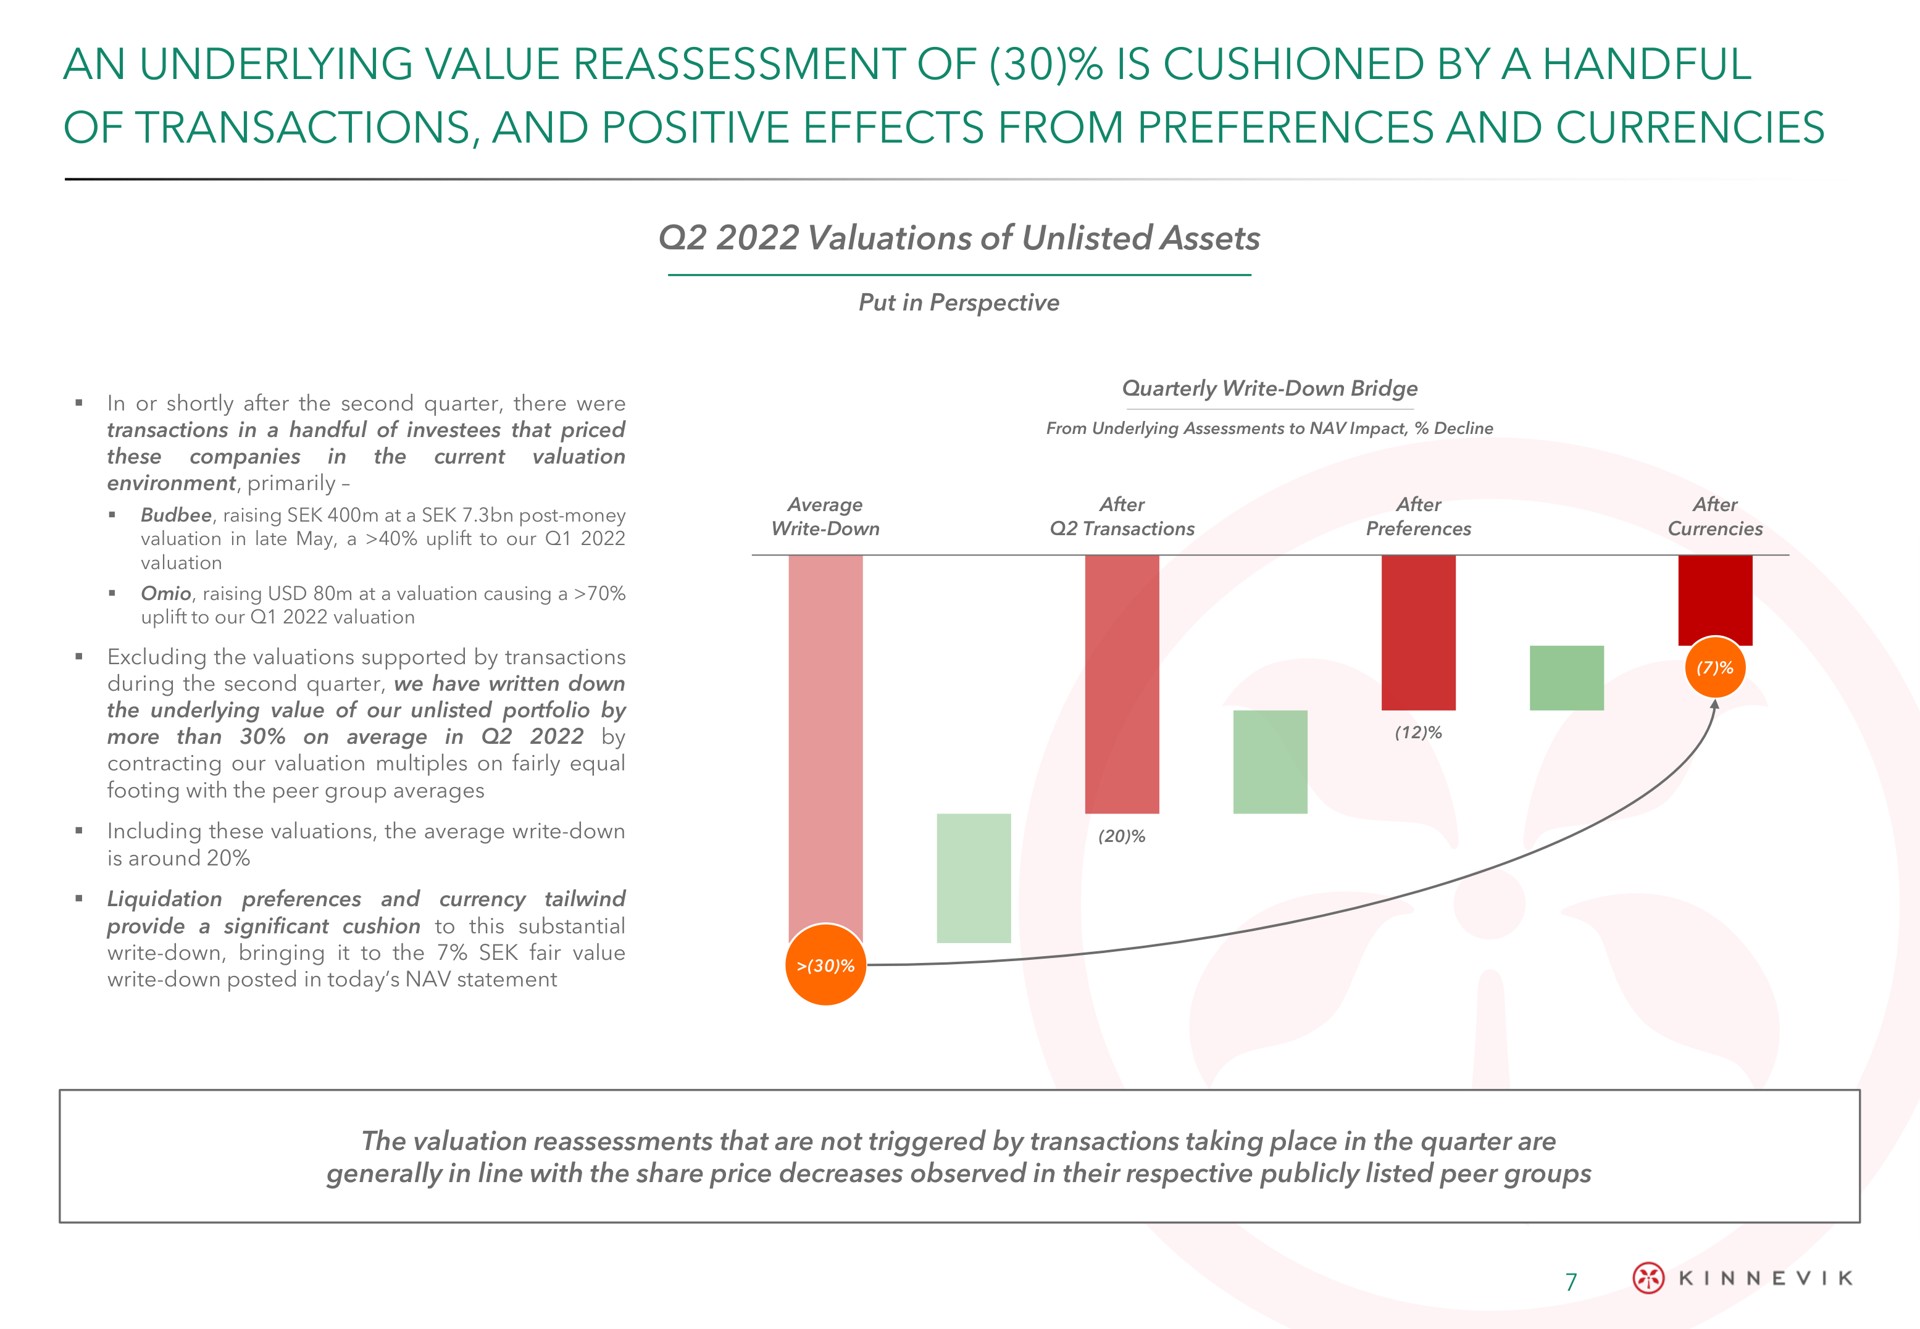 an underlying value reassessment of is cushioned by a handful of transactions and positive effects from preferences and currencies | Kinnevik